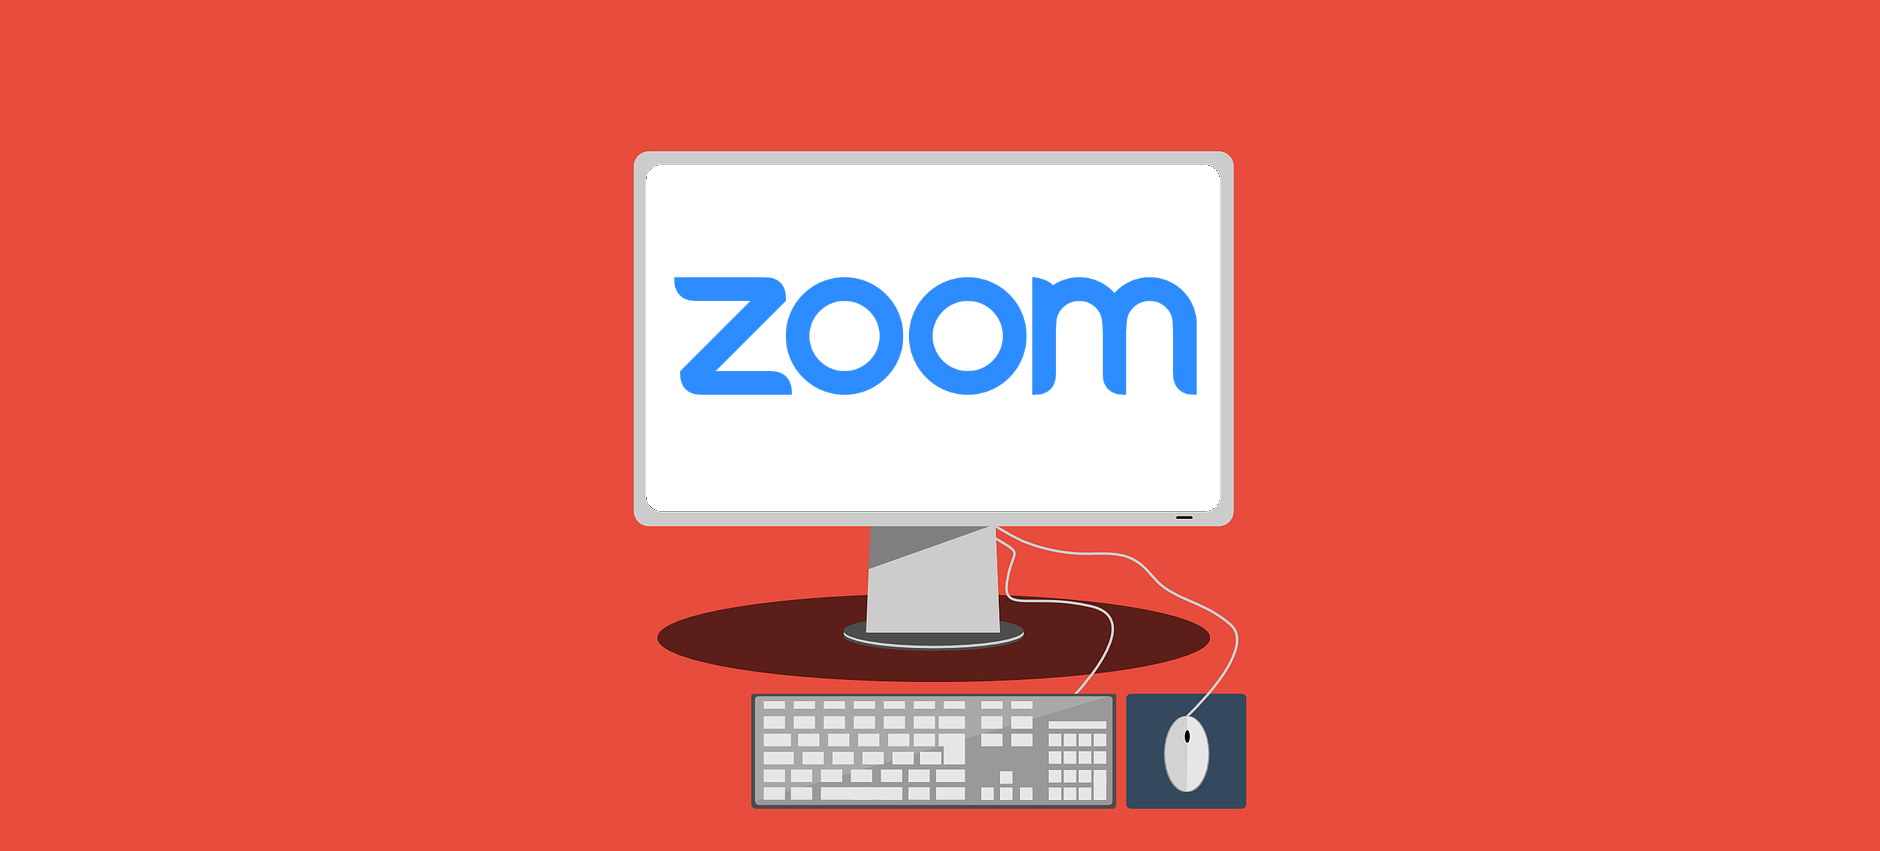 Zoom on a computer monitor vector